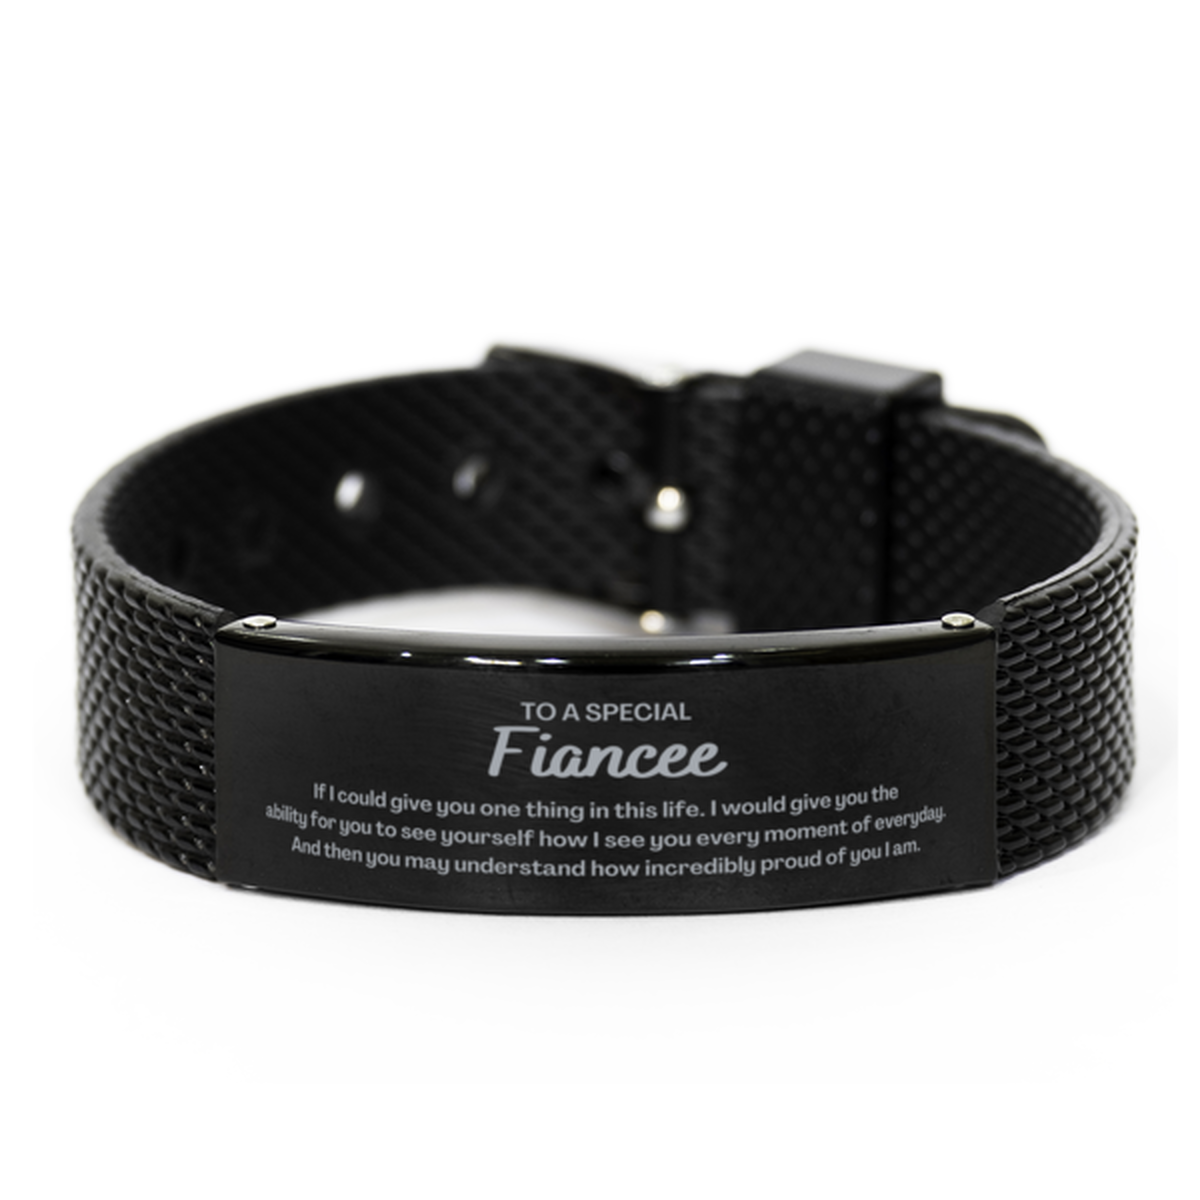 To My Fiancee Black Shark Mesh Bracelet, Gifts For Fiancee Engraved, Inspirational Gifts for Christmas Birthday, Epic Gifts for Fiancee To A Special Fiancee how incredibly proud of you I am